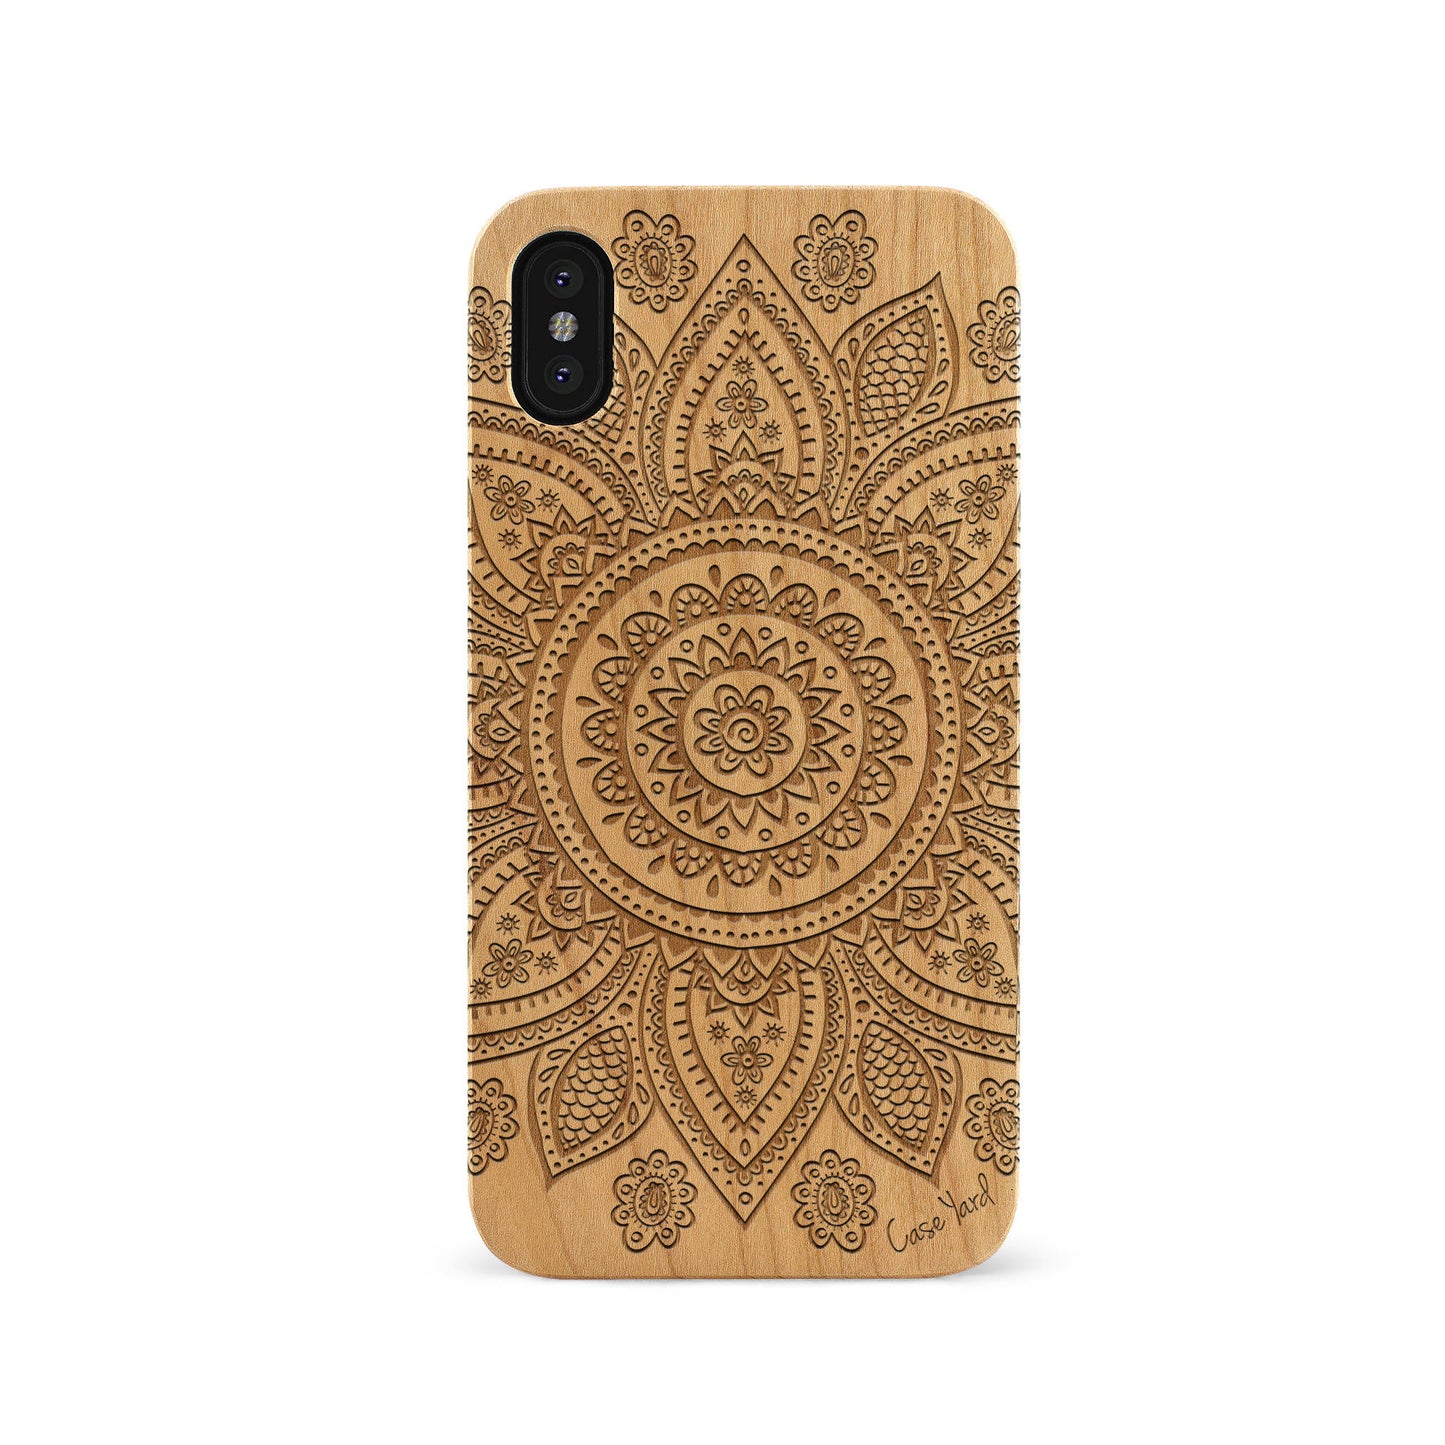 Wooden Cell Phone Case Cover, Laser Engraved case for iPhone & Samsung phone Mandala Design